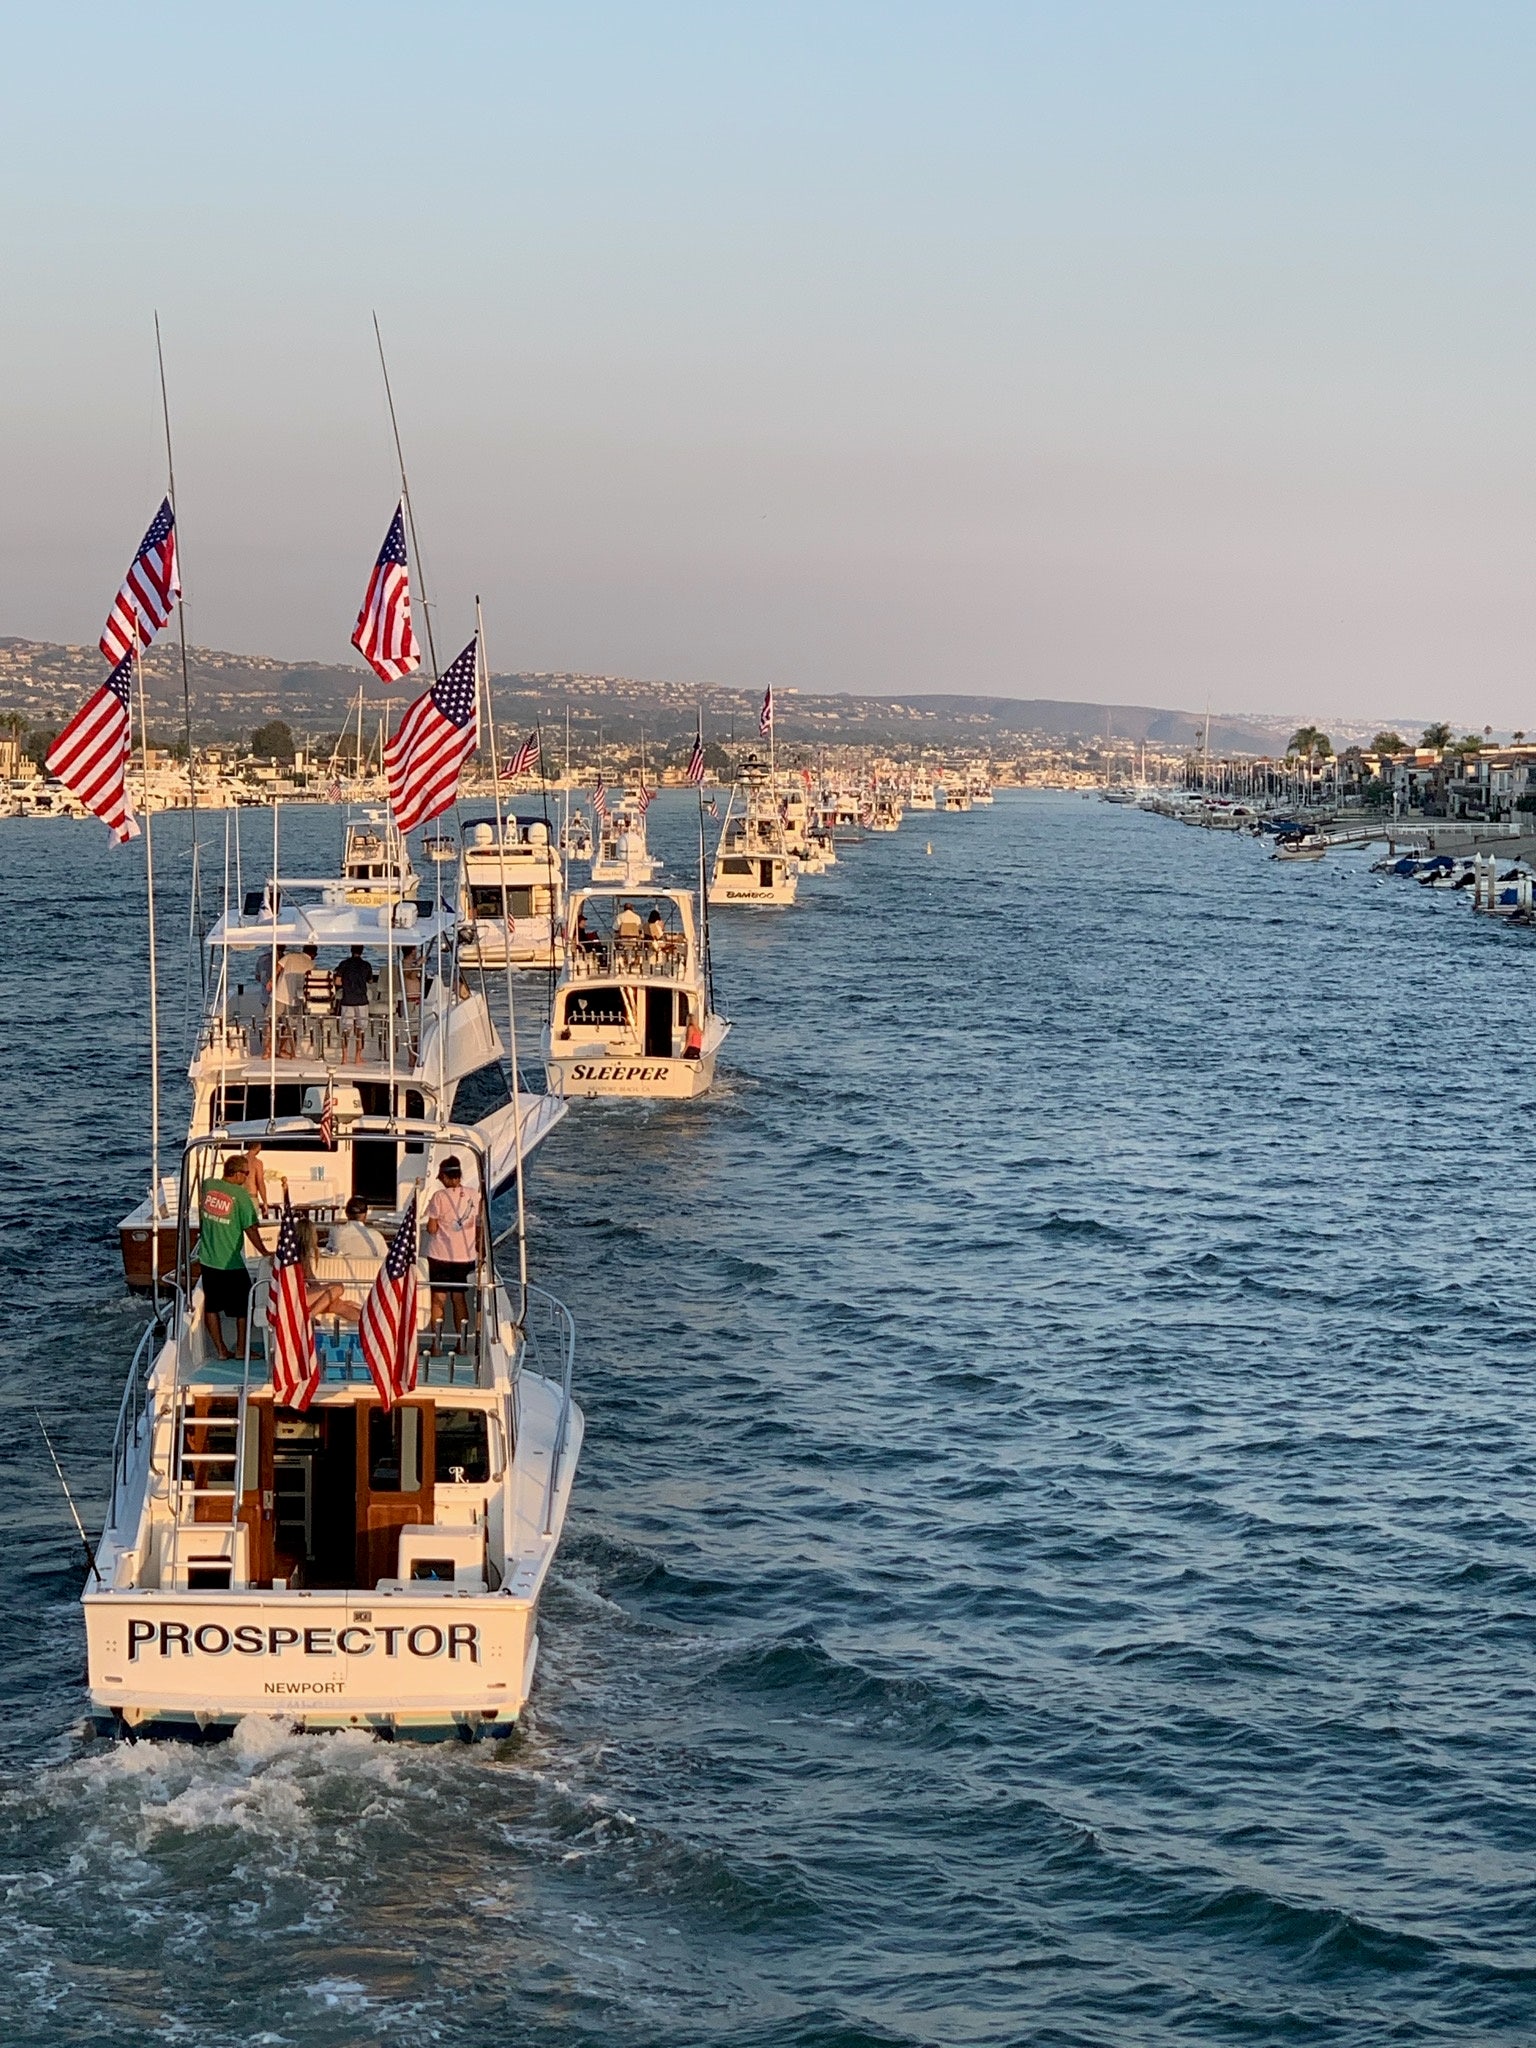 Afghanistan vets participate in sportfishing tournament to heal war wounds, create lifelines